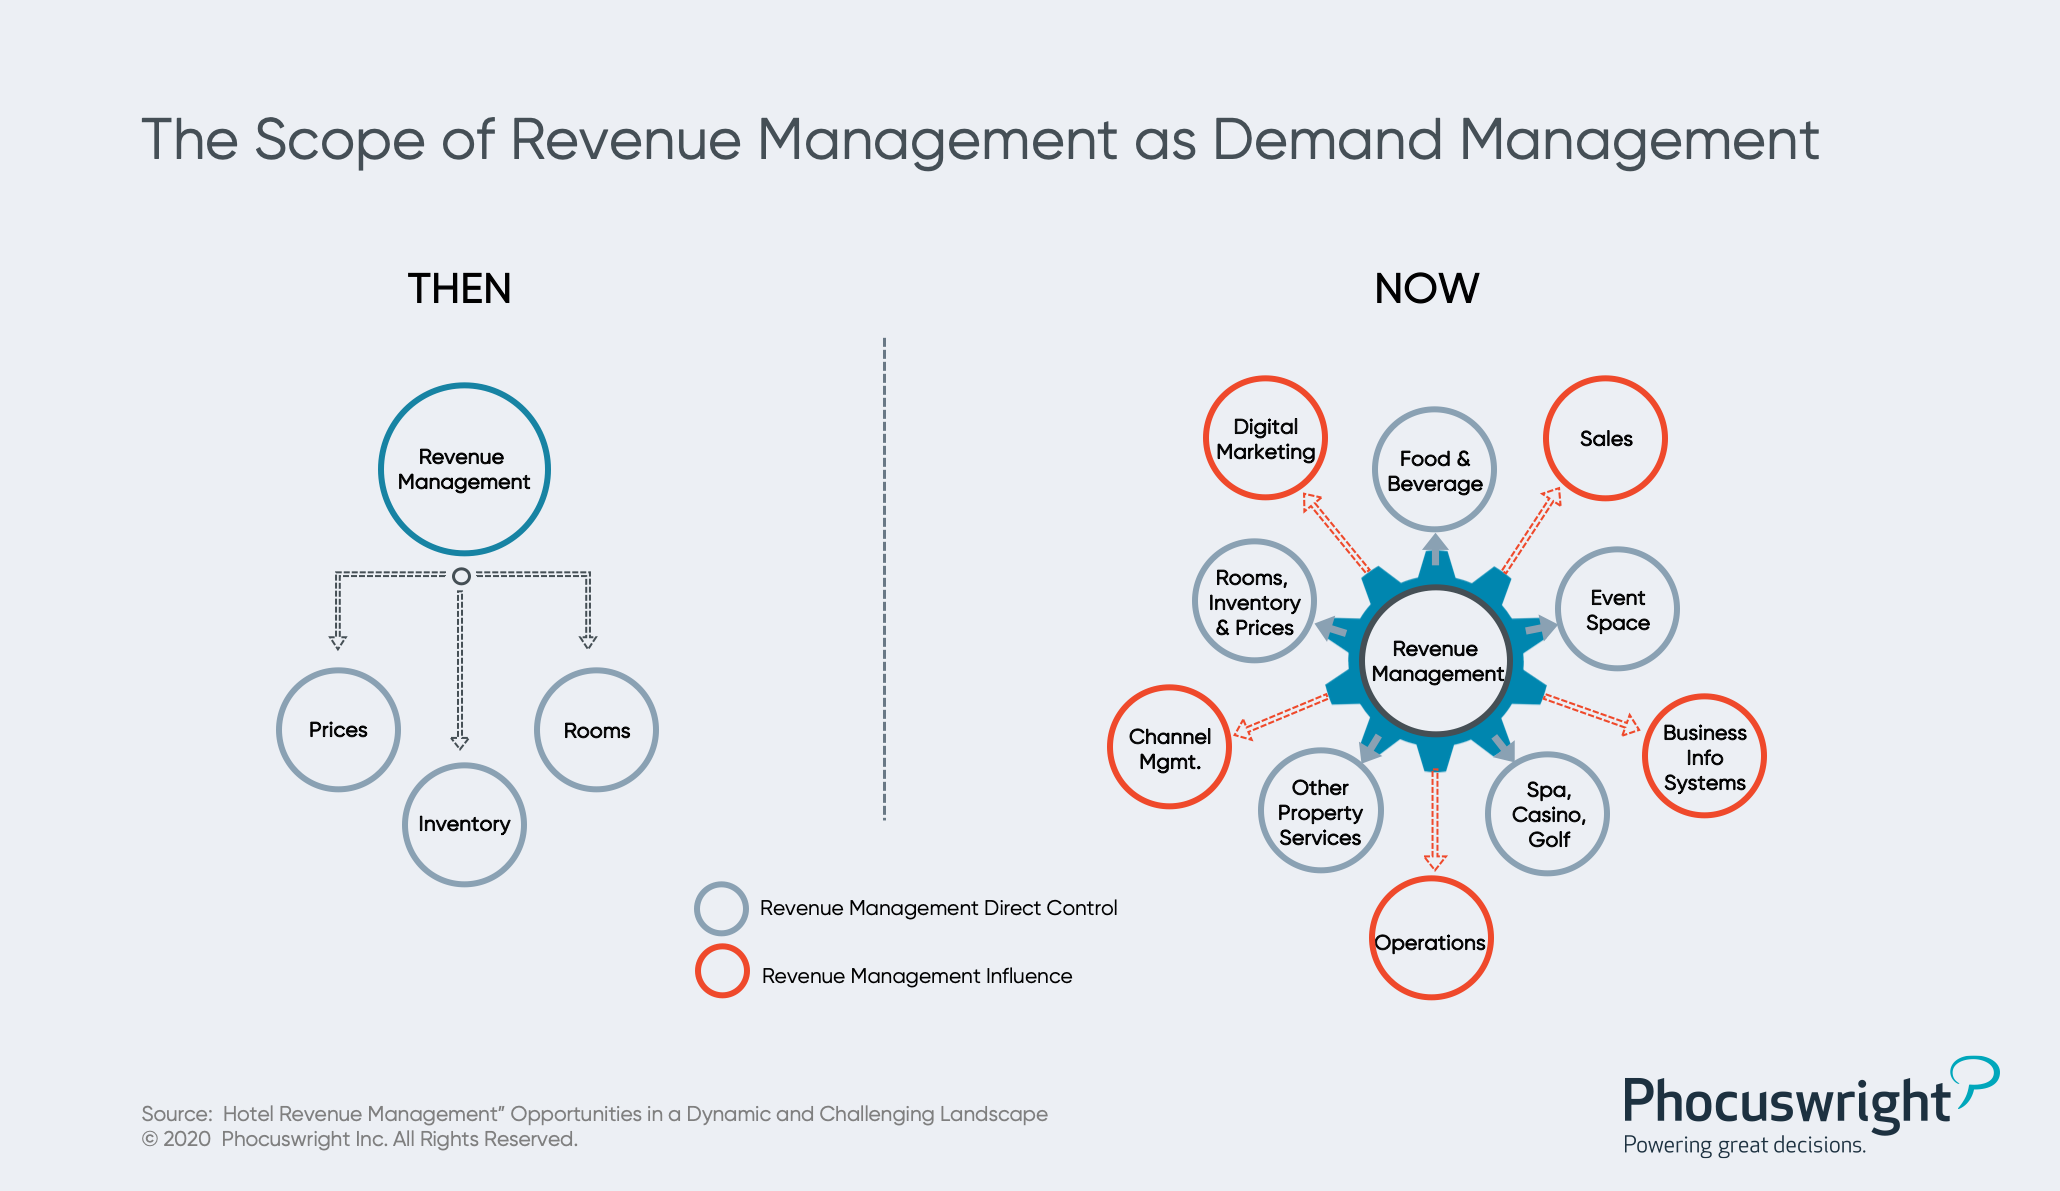 hotel-revenue-management-opportunities-in-a-dynamic-and-challenging-landscape-phocuswright